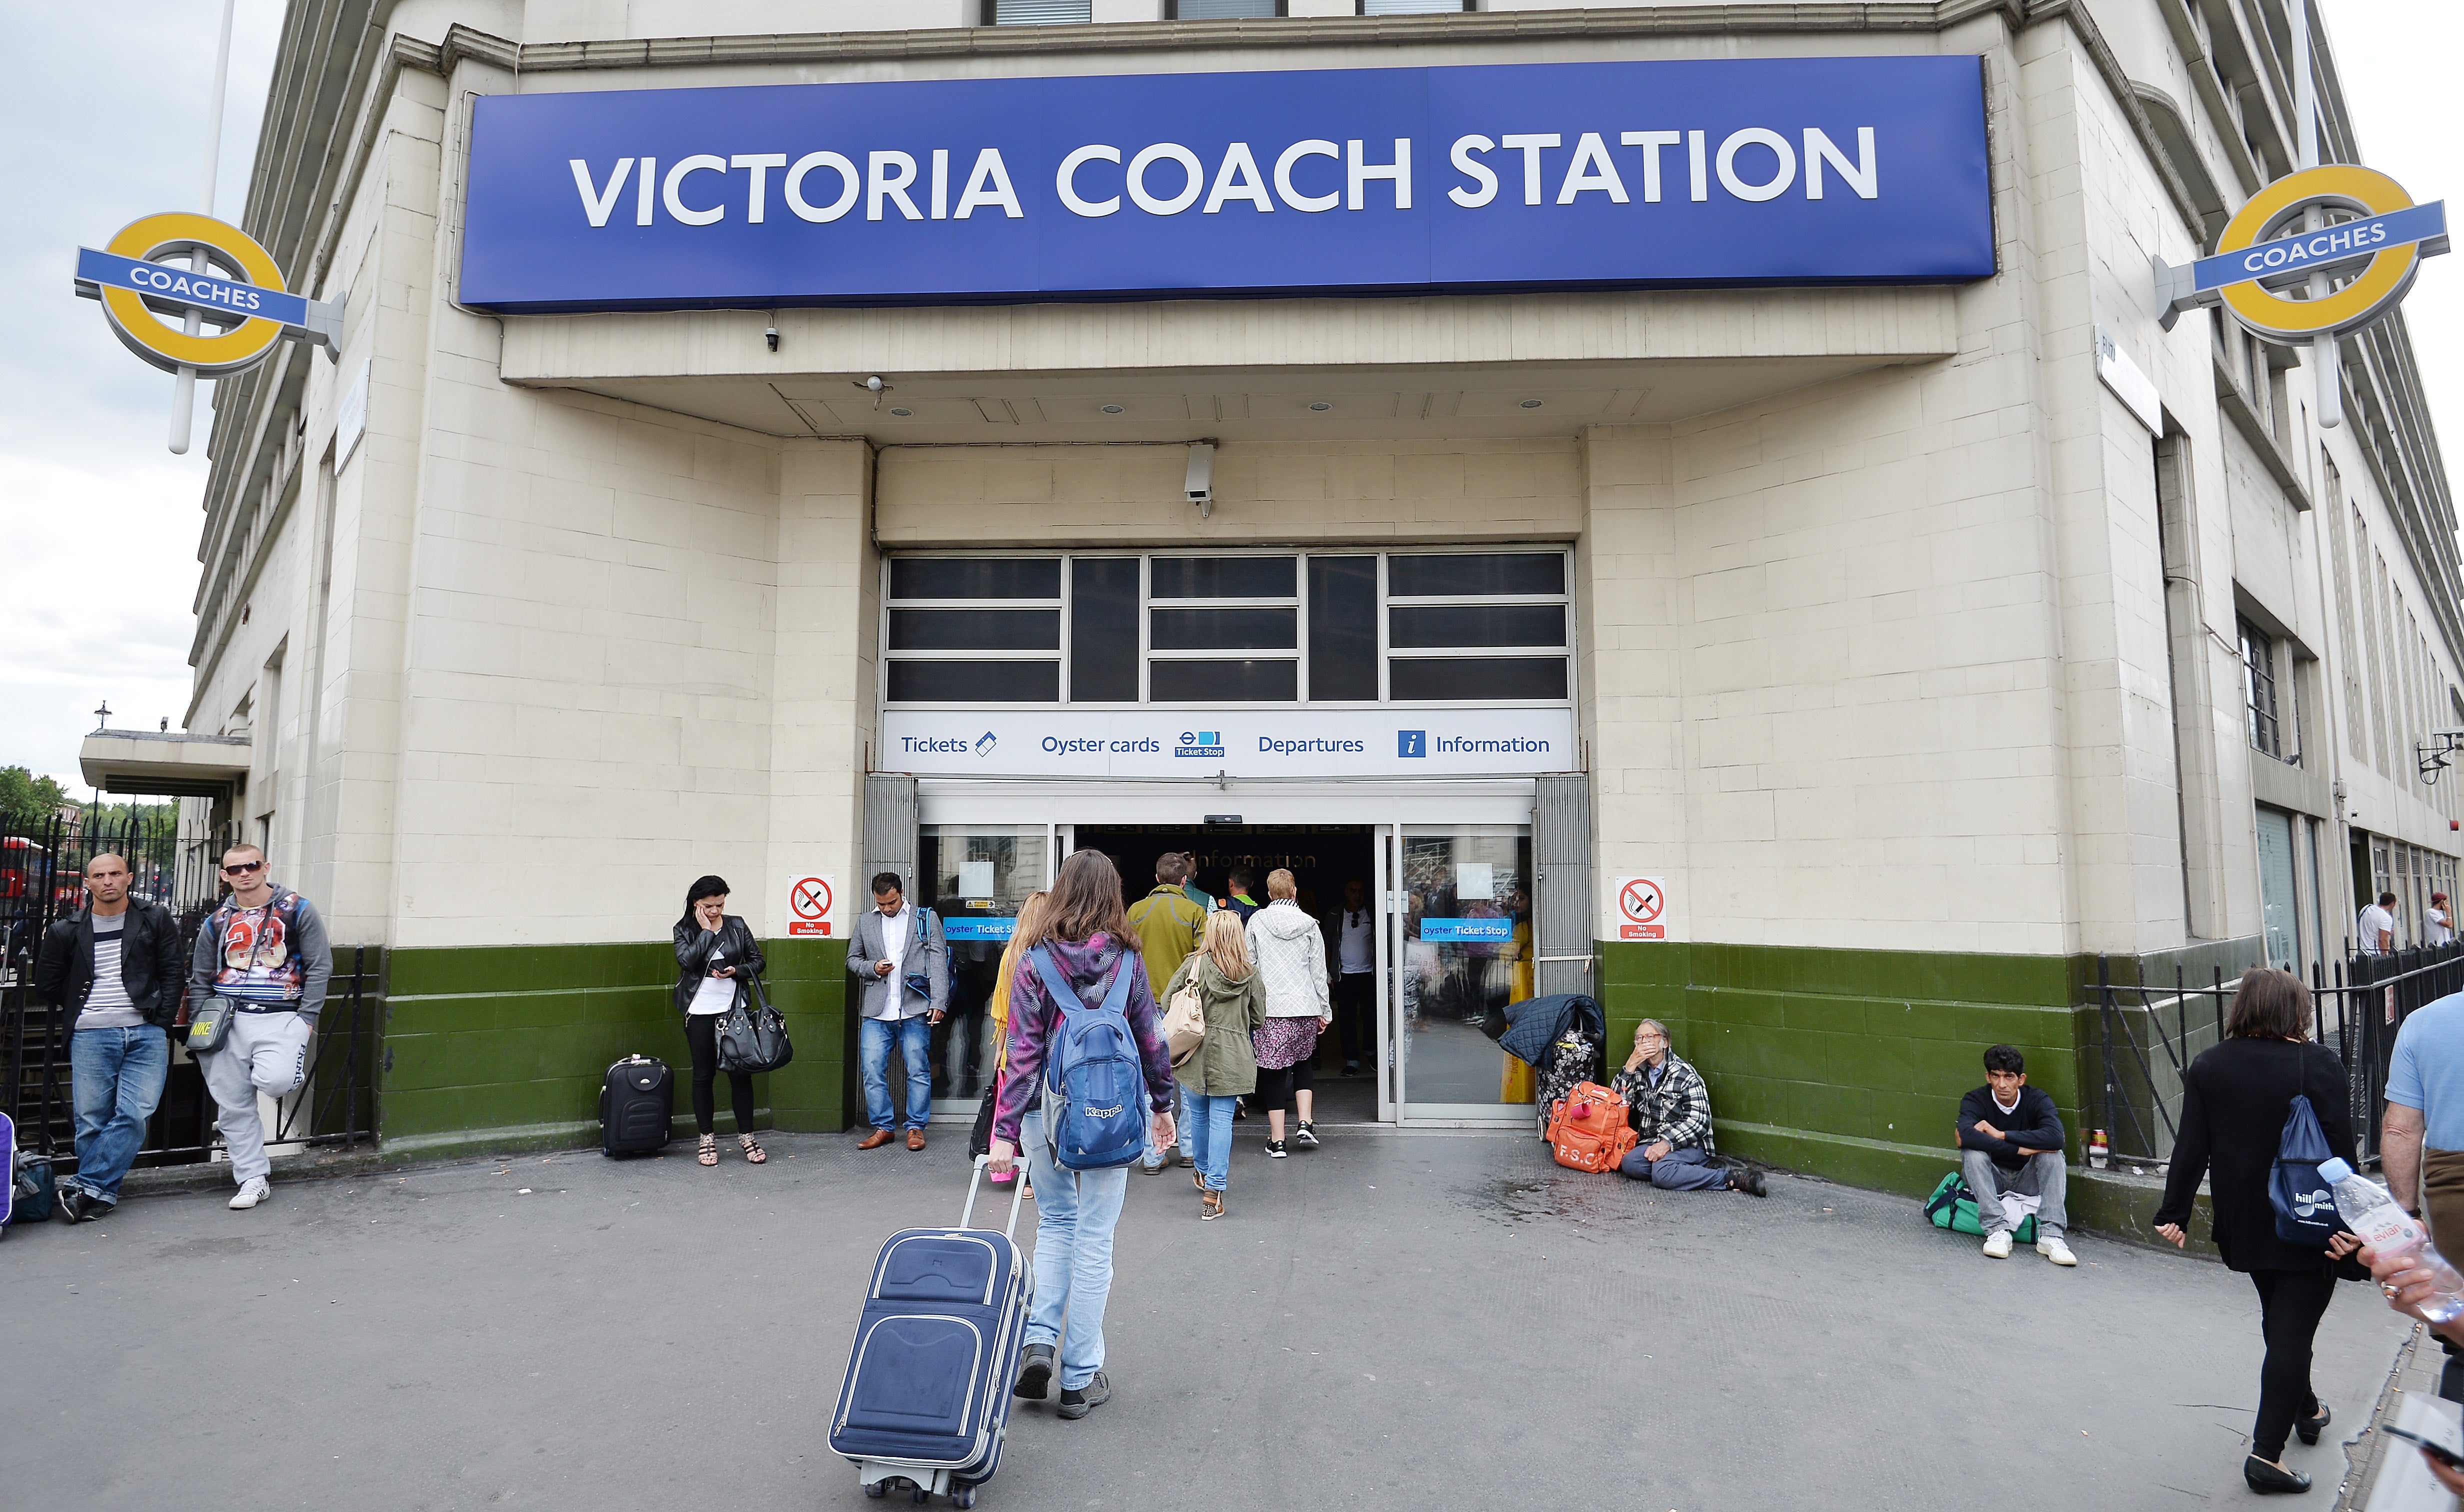 A man has been arrested after a Polish man was assaulted near Victoria Coach Station